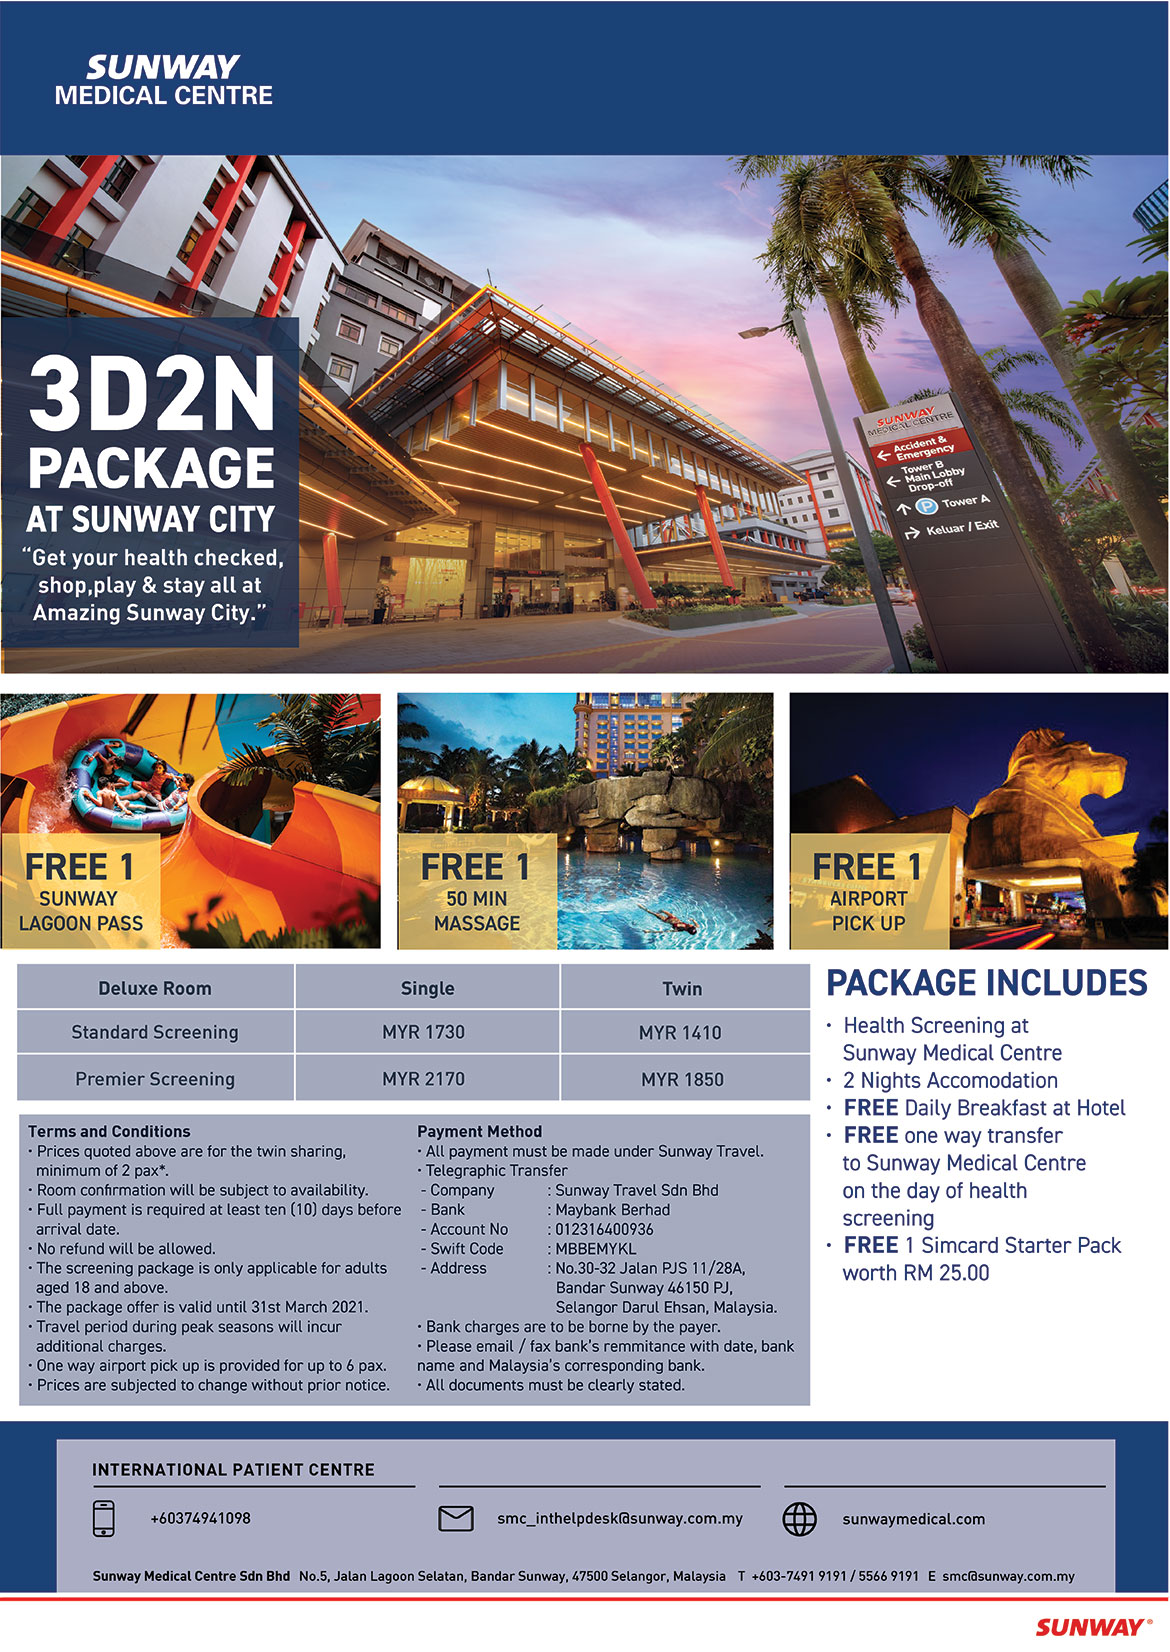 All-In-One 3D2N Medical Travel Package